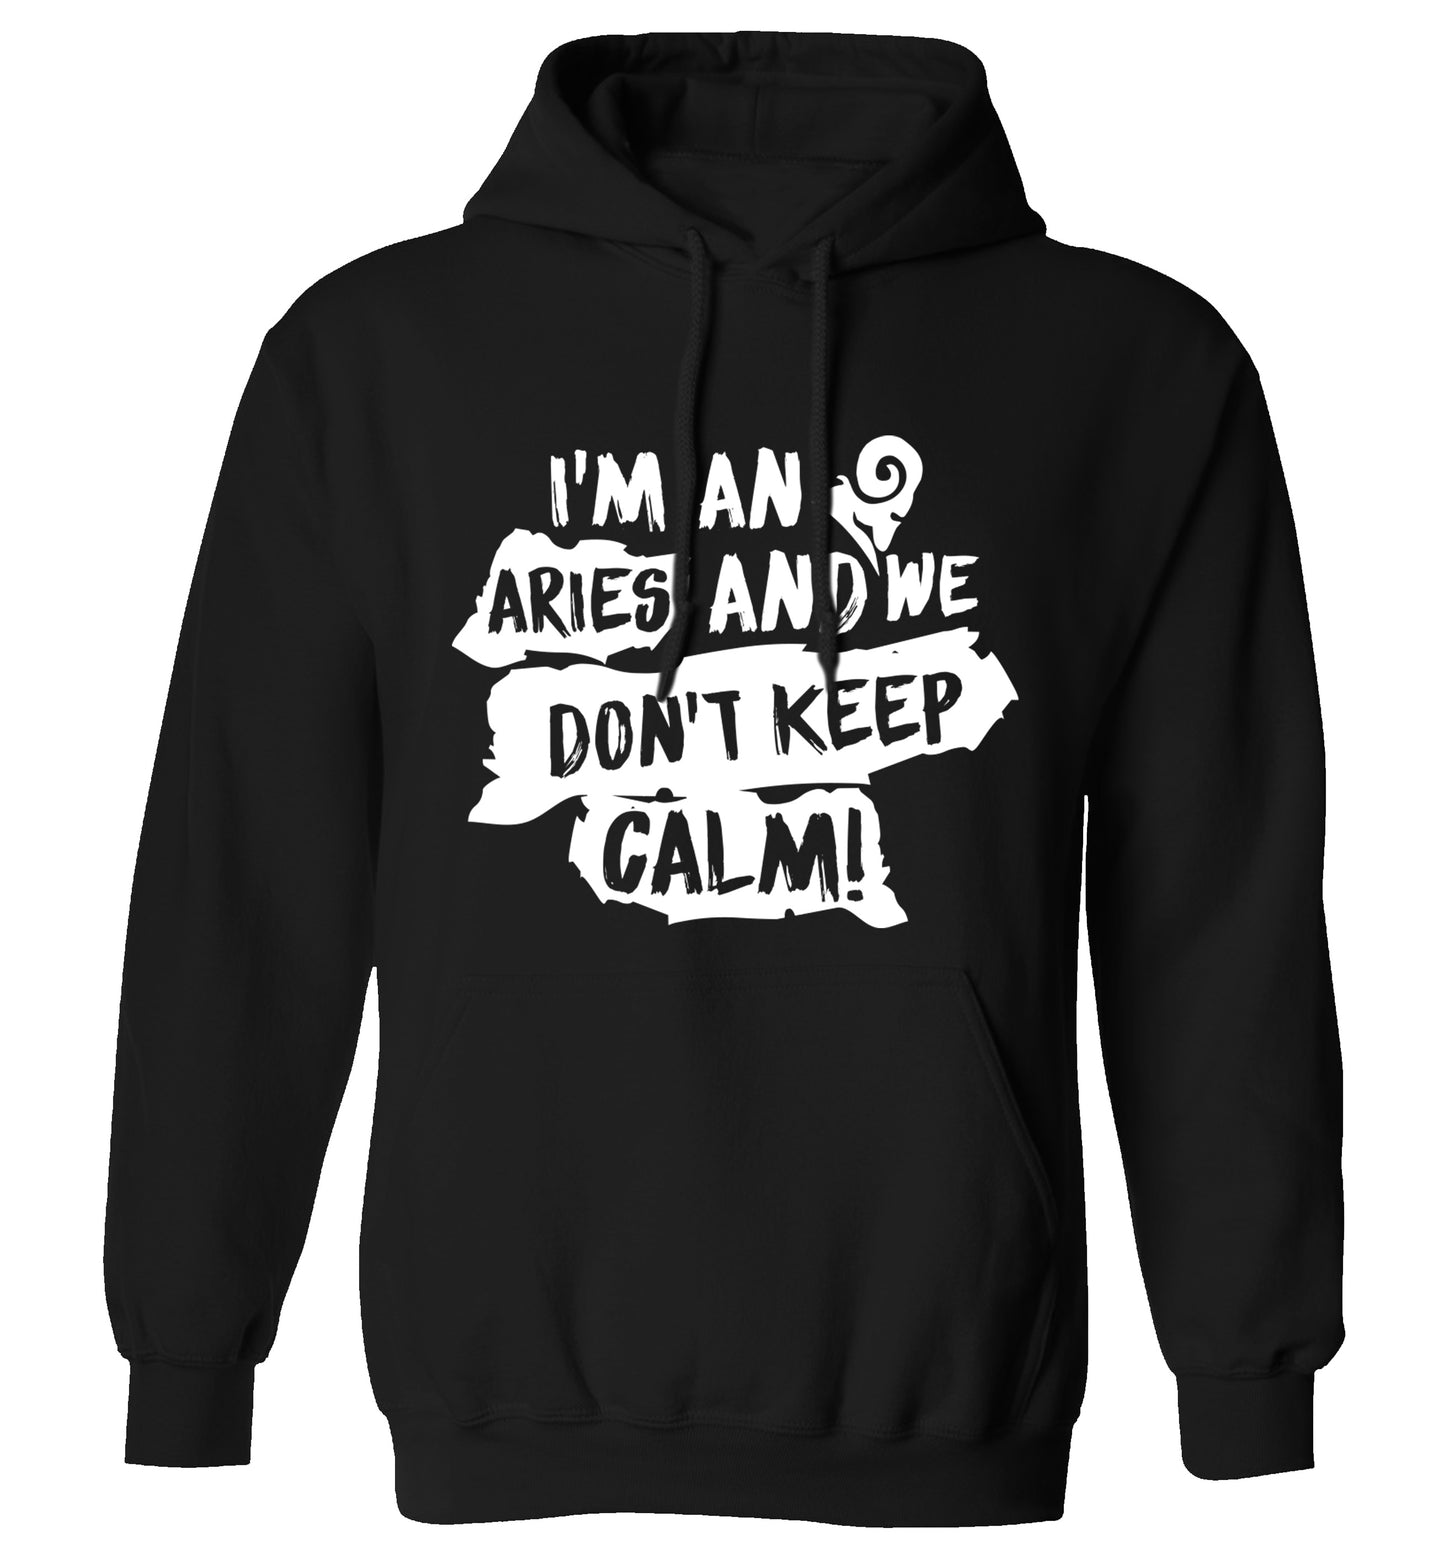 I'm an aries and we don't keep calm adults unisex black hoodie 2XL